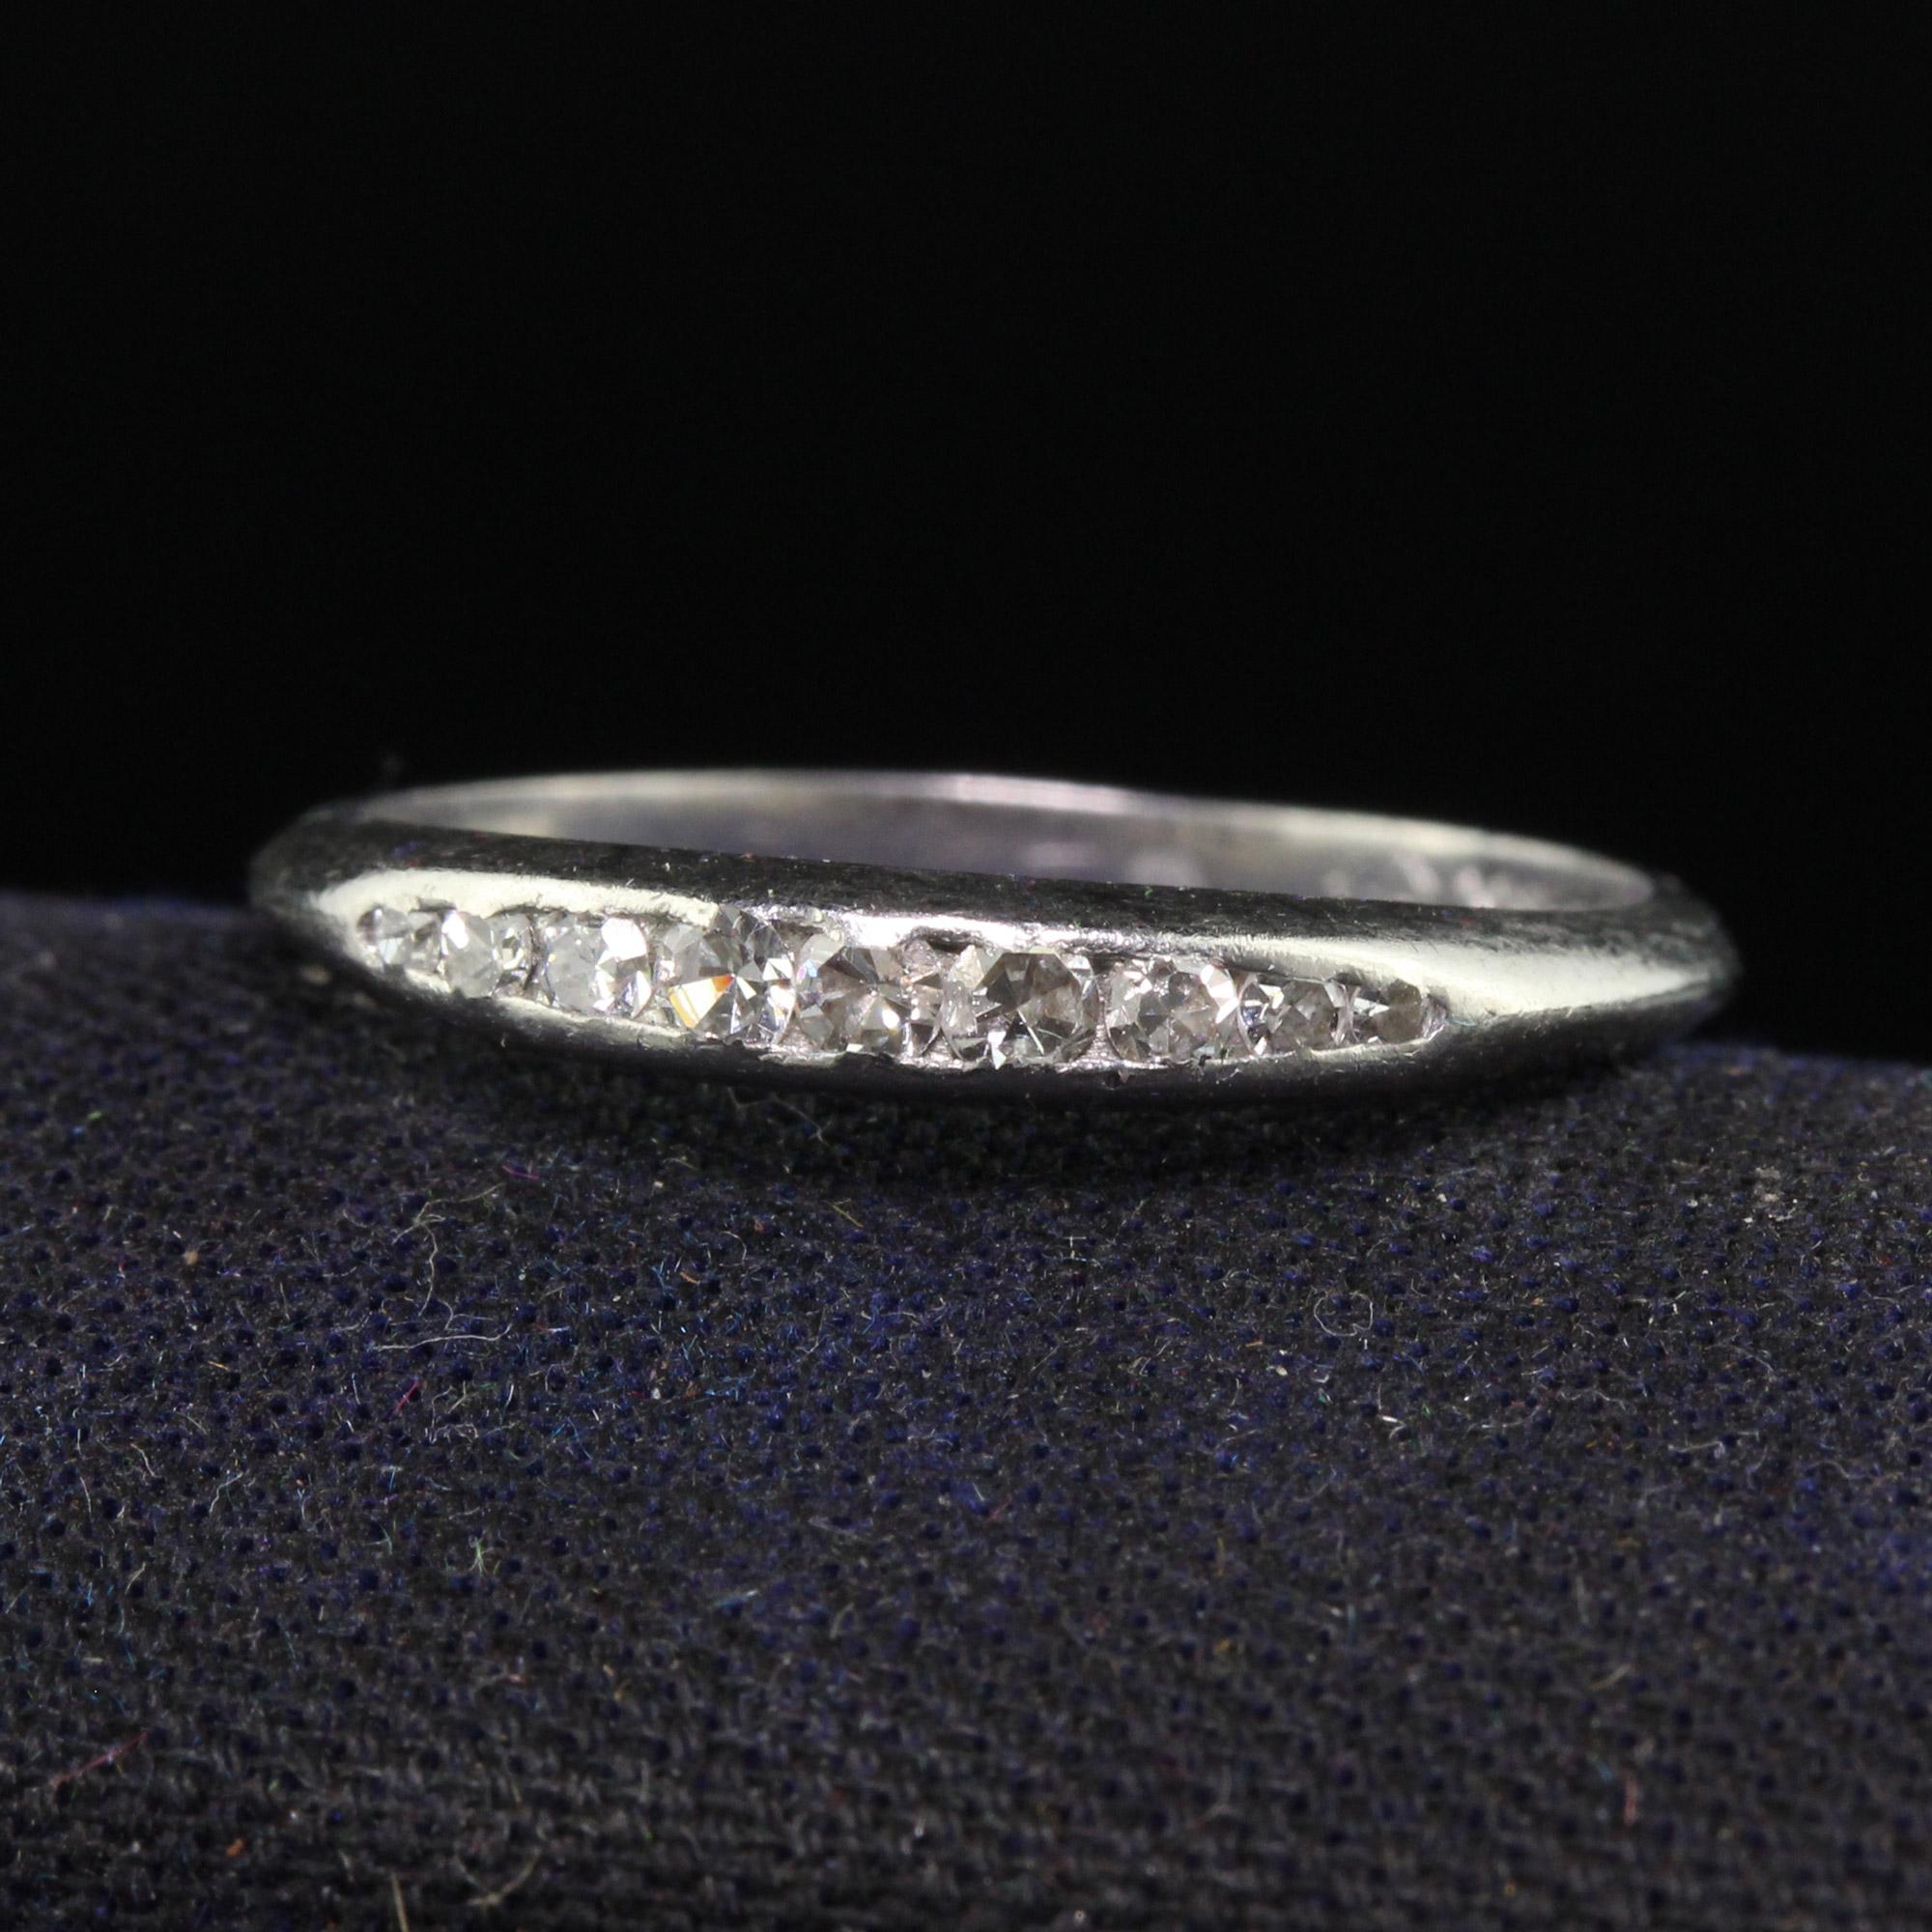 Beautiful Antique Art Deco Platinum Single Cut Graduated Diamond Wedding Band. This classic wedding band is crafted in platinum. There are graduated single cut diamonds on the top of the band and is in very good condition. The ring sits low on the